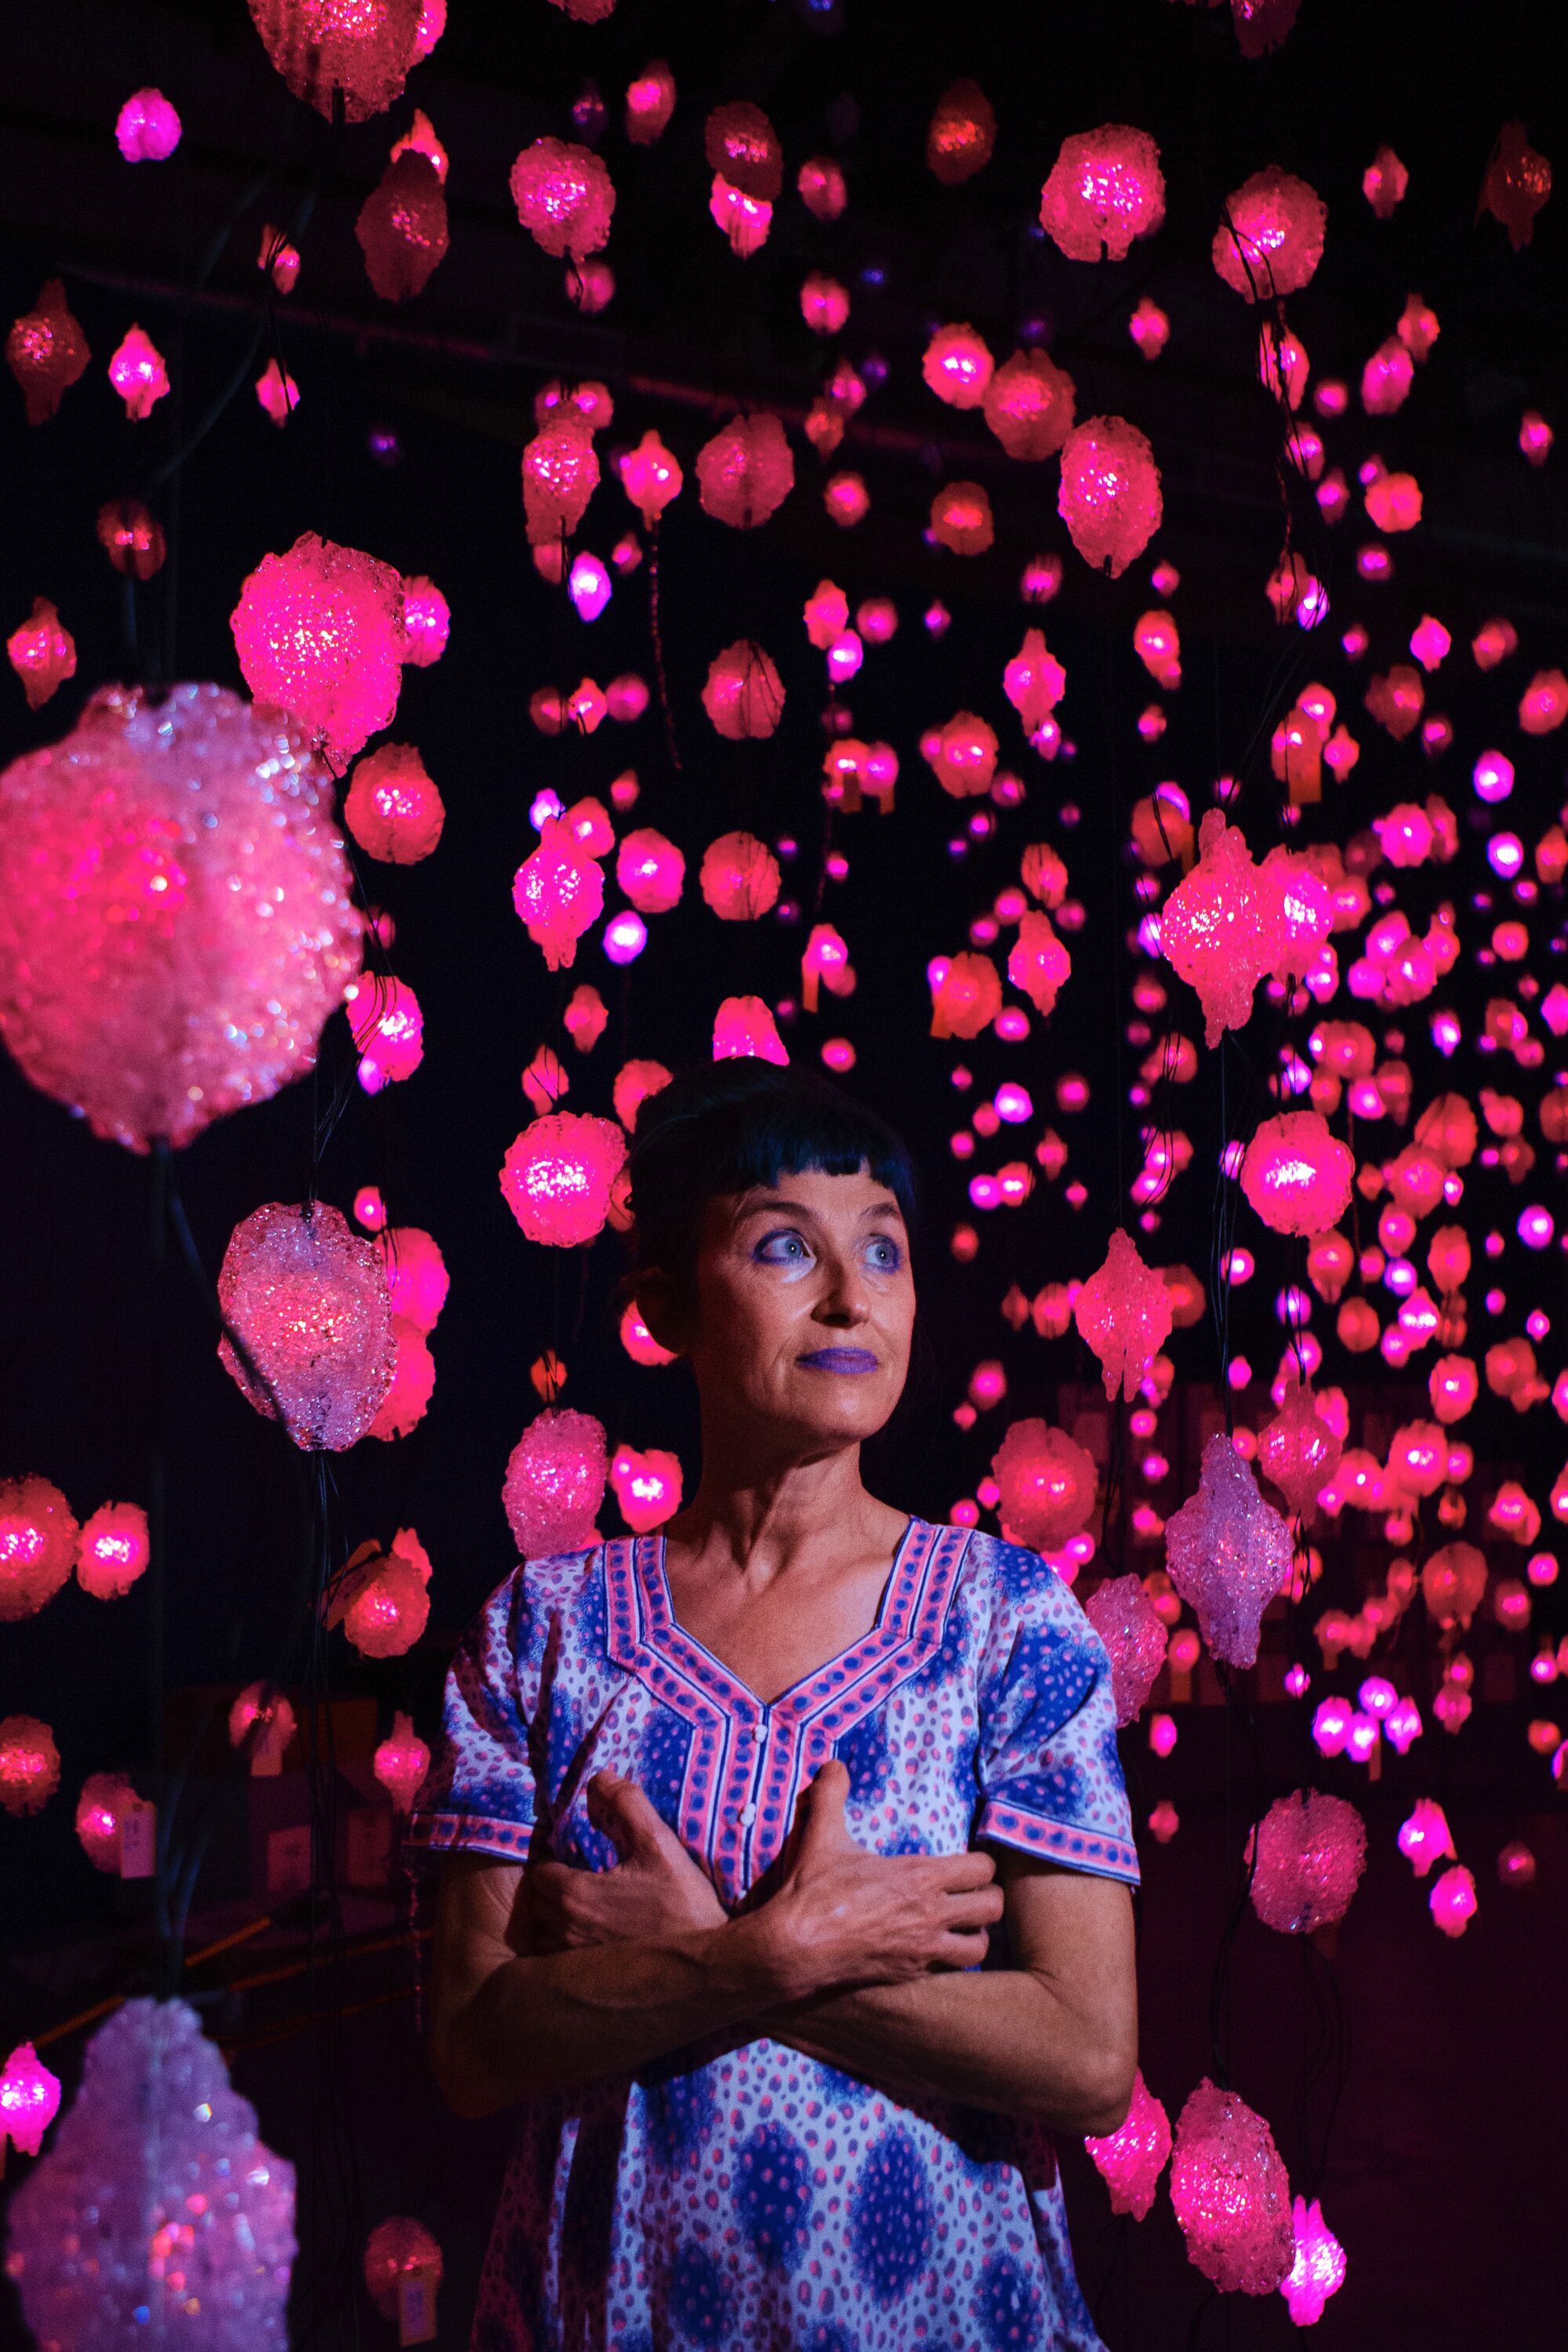 Pipilotti Rist in a blue paisley tunic stands amid dozens of pink lights